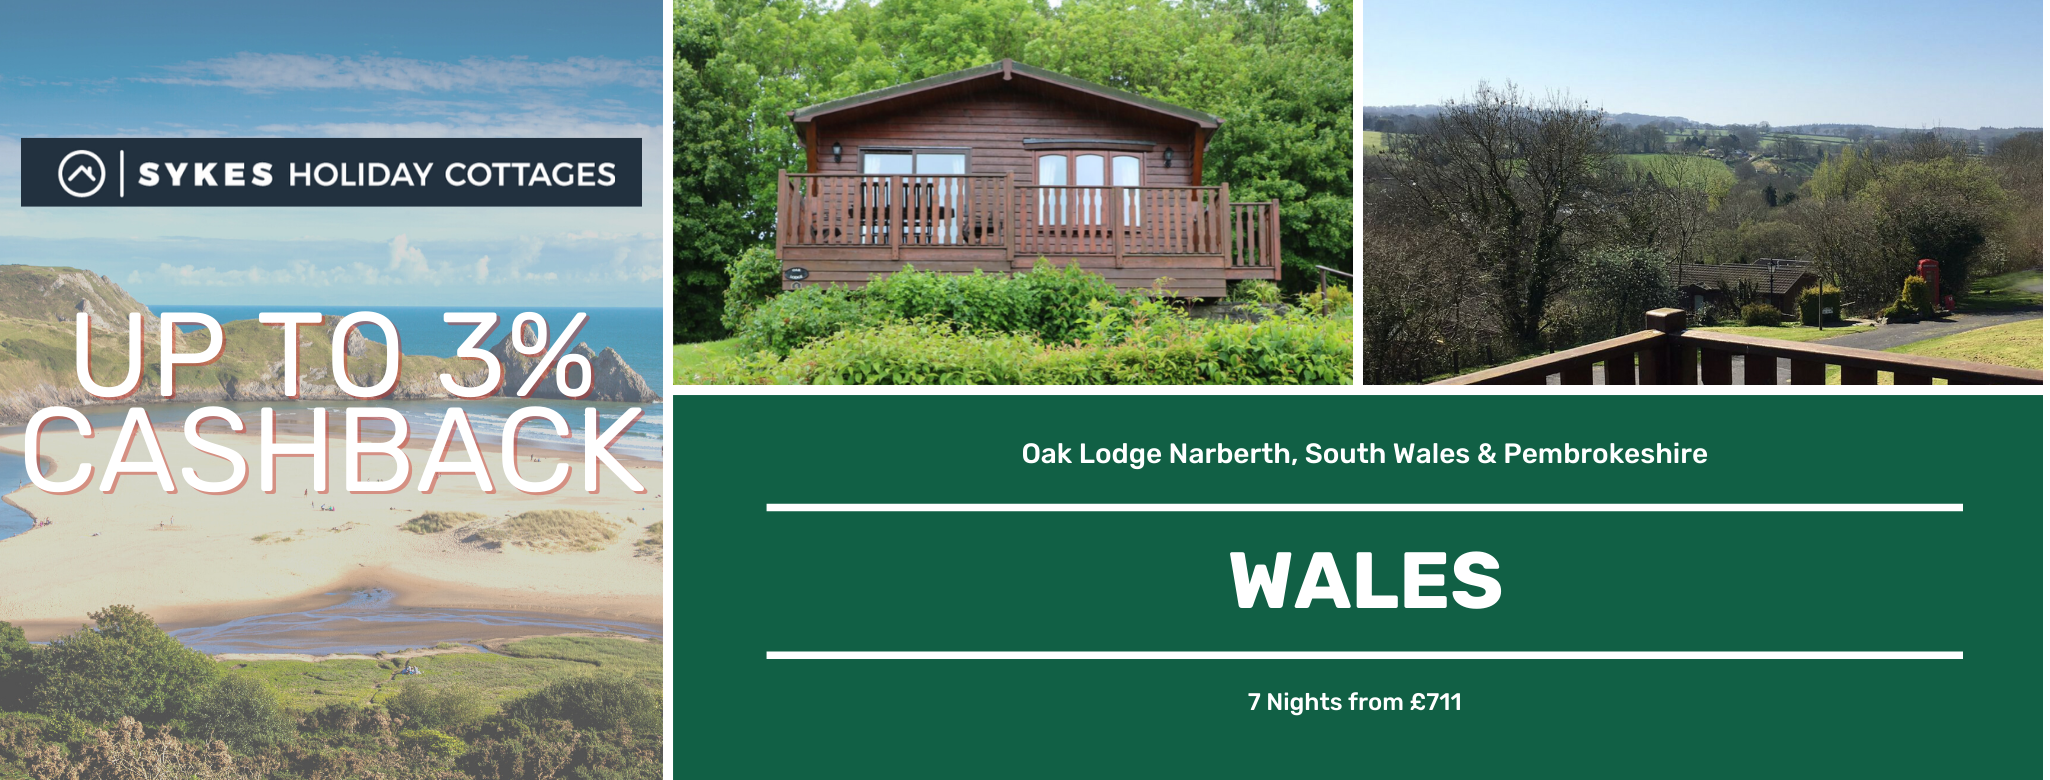 Sykes Holiday Cottages Wales Up to 3% Cashback